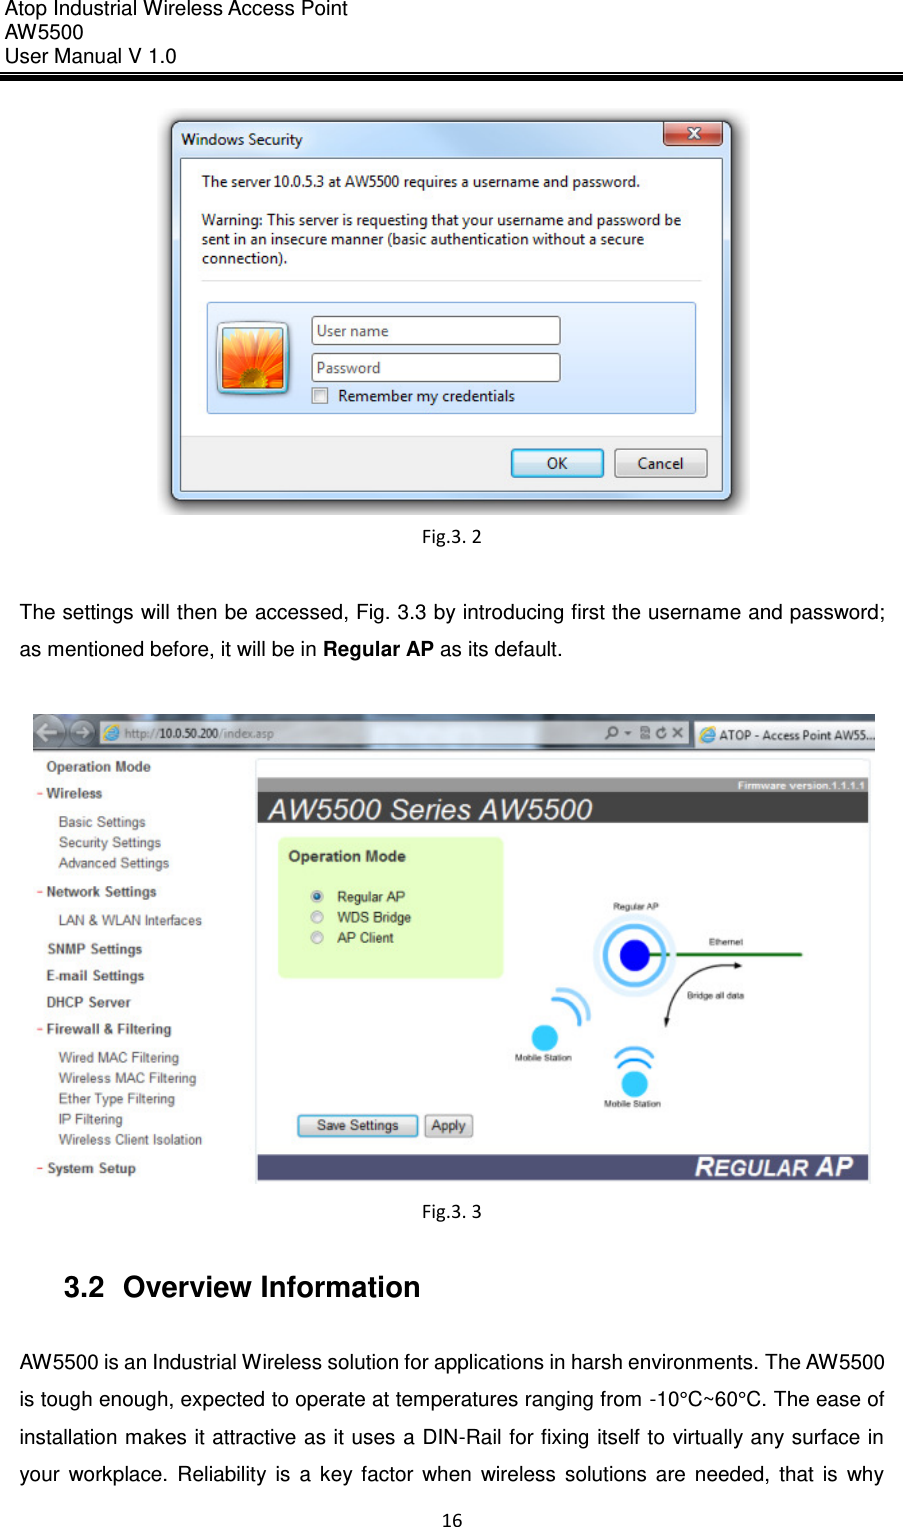 Atop Industrial Wireless Access Point AW 5500 User Manual V 1.0                      16   Fig.3. 2  The settings will then be accessed, Fig. 3.3 by introducing first the username and password; as mentioned before, it will be in Regular AP as its default.   Fig.3. 3  3.2  Overview Information  AW5500 is an Industrial Wireless solution for applications in harsh environments. The AW5500 is tough enough, expected to operate at temperatures ranging from -10°C~60°C. The ease of installation makes it attractive as it uses a DIN-Rail for fixing itself to virtually any surface in your  workplace.  Reliability  is  a  key  factor  when  wireless  solutions  are  needed,  that  is  why 